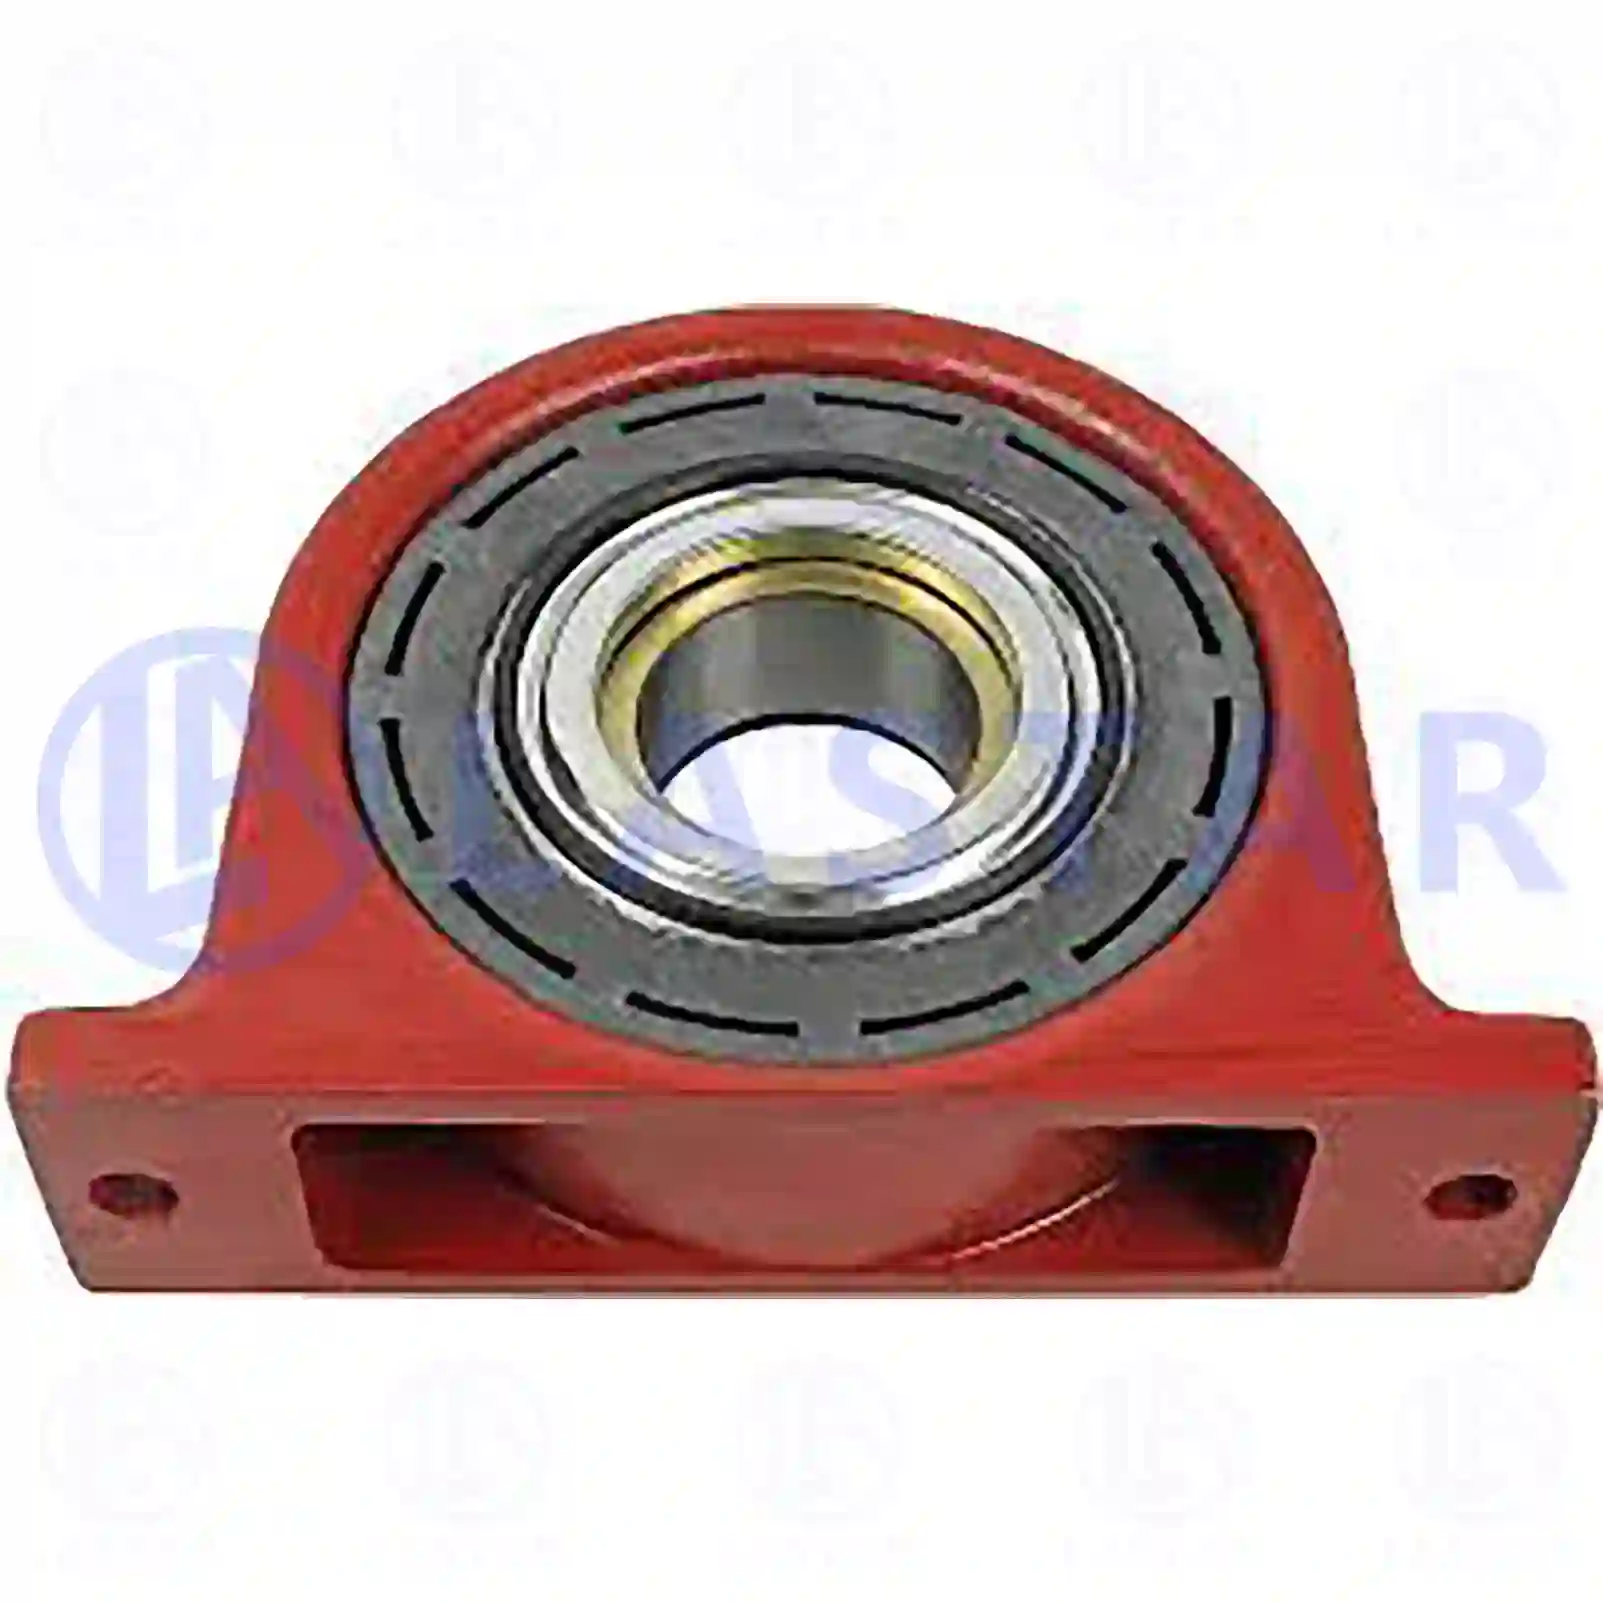 Center bearing, 77734350, 42536961, 9315762 ||  77734350 Lastar Spare Part | Truck Spare Parts, Auotomotive Spare Parts Center bearing, 77734350, 42536961, 9315762 ||  77734350 Lastar Spare Part | Truck Spare Parts, Auotomotive Spare Parts